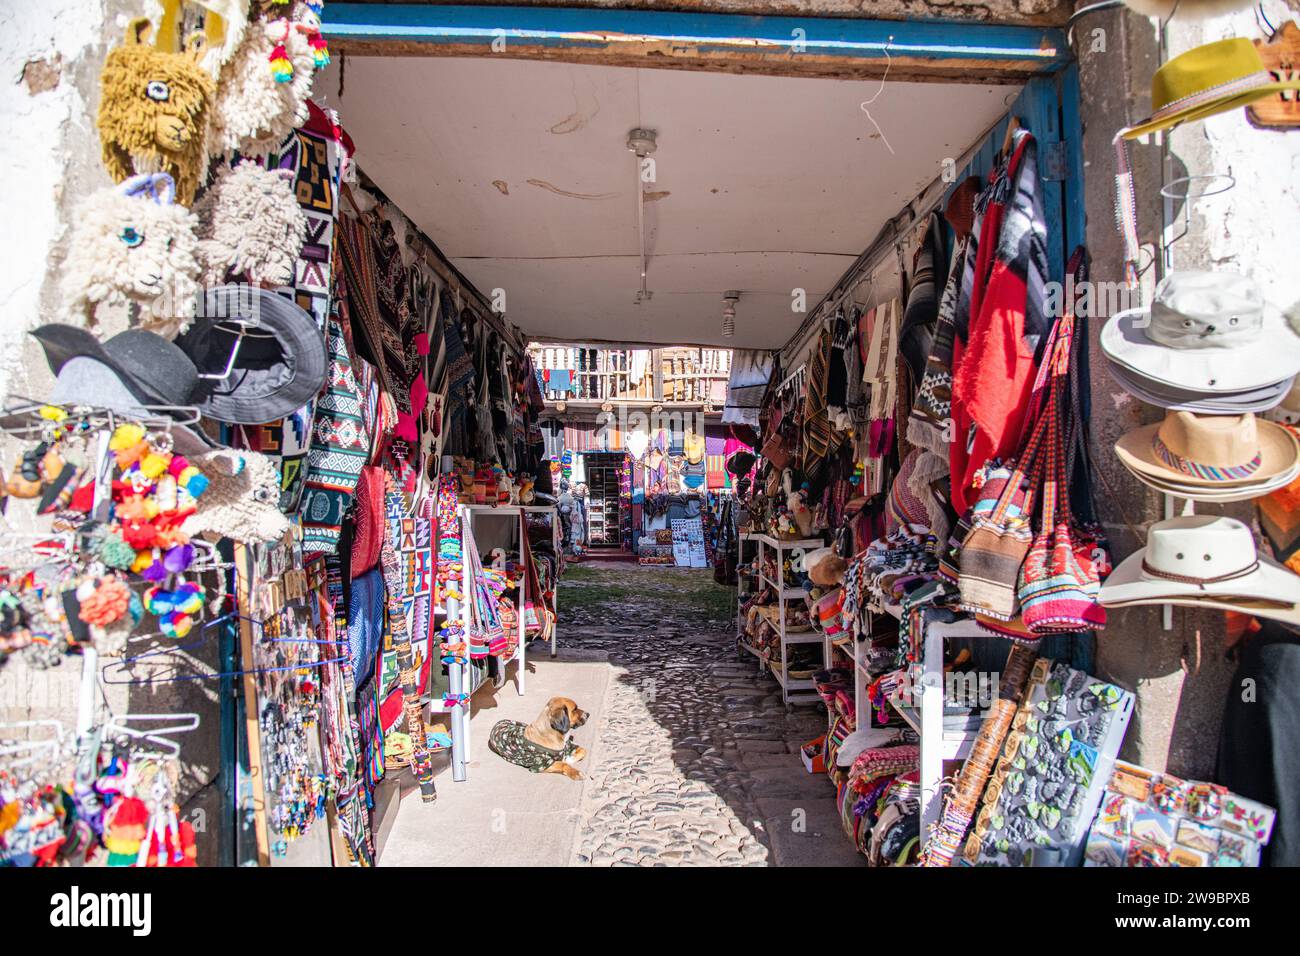 Shops selling clothes, souvenirs, gifts and trinkets in Cusco, Peru Stock Photo